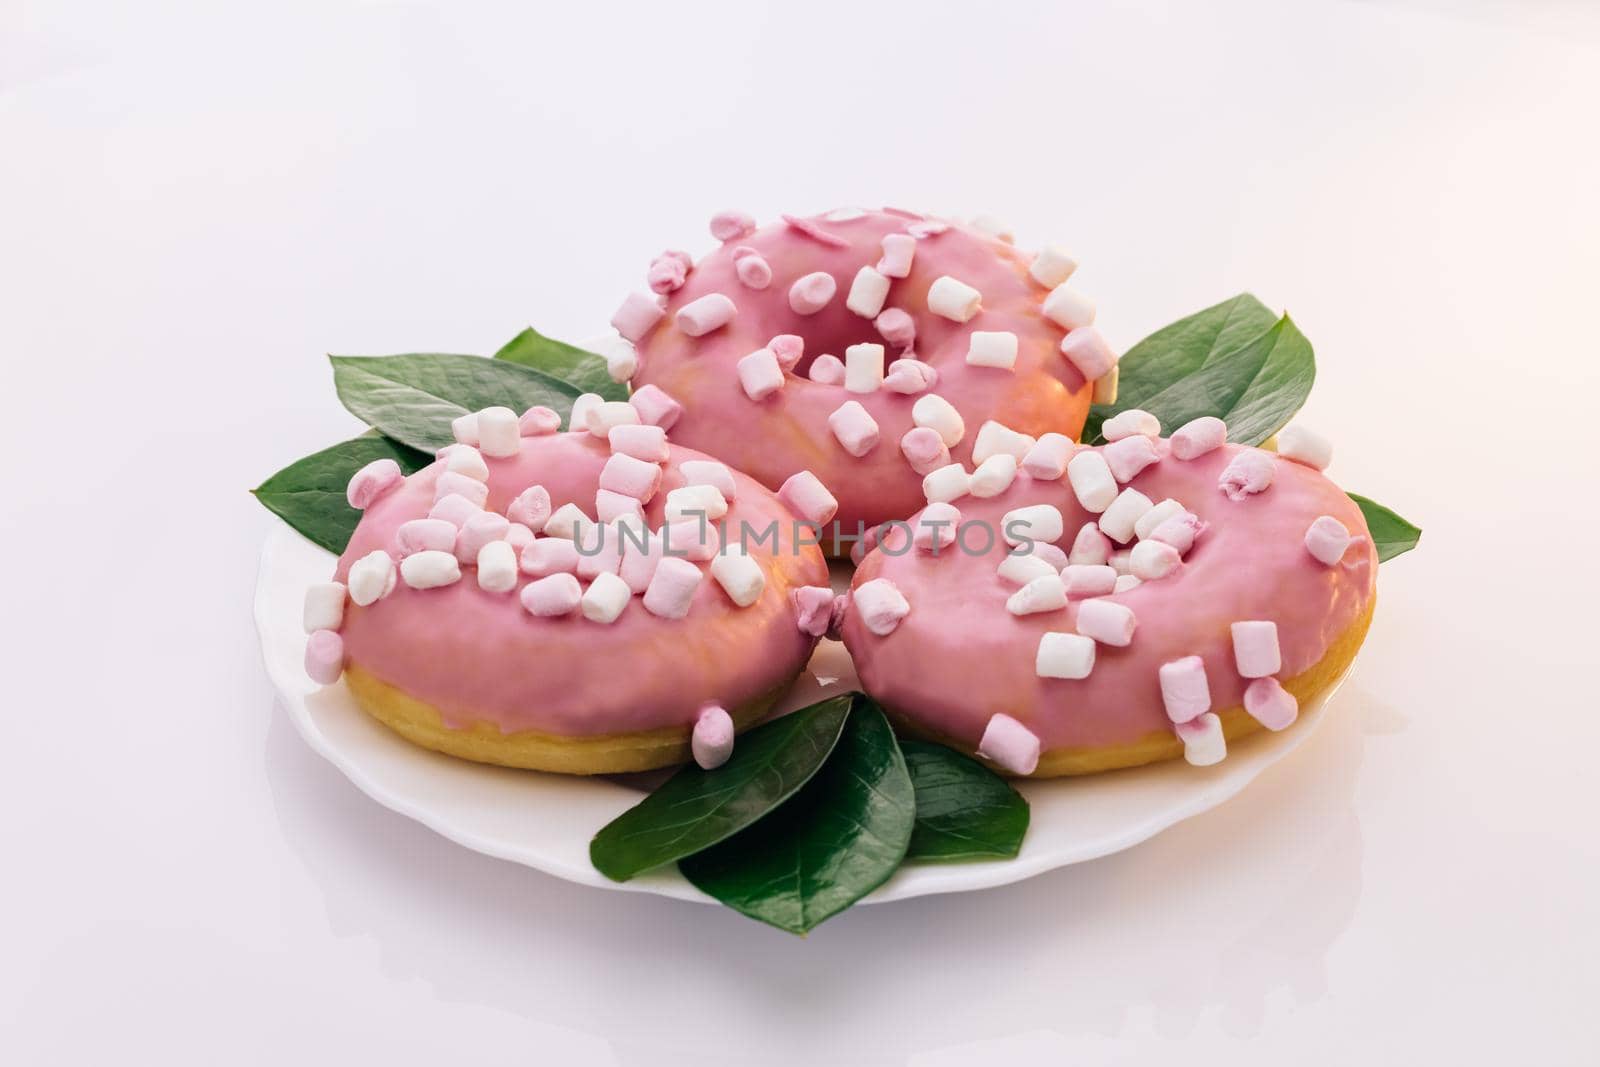 Colorful frosted pink doughnut. Assorted donuts. Pink glazed and sprinkles donuts. Rotating shot of white tasty delicious sweet donut with colorful sprinkles on white background. Dessert by uflypro